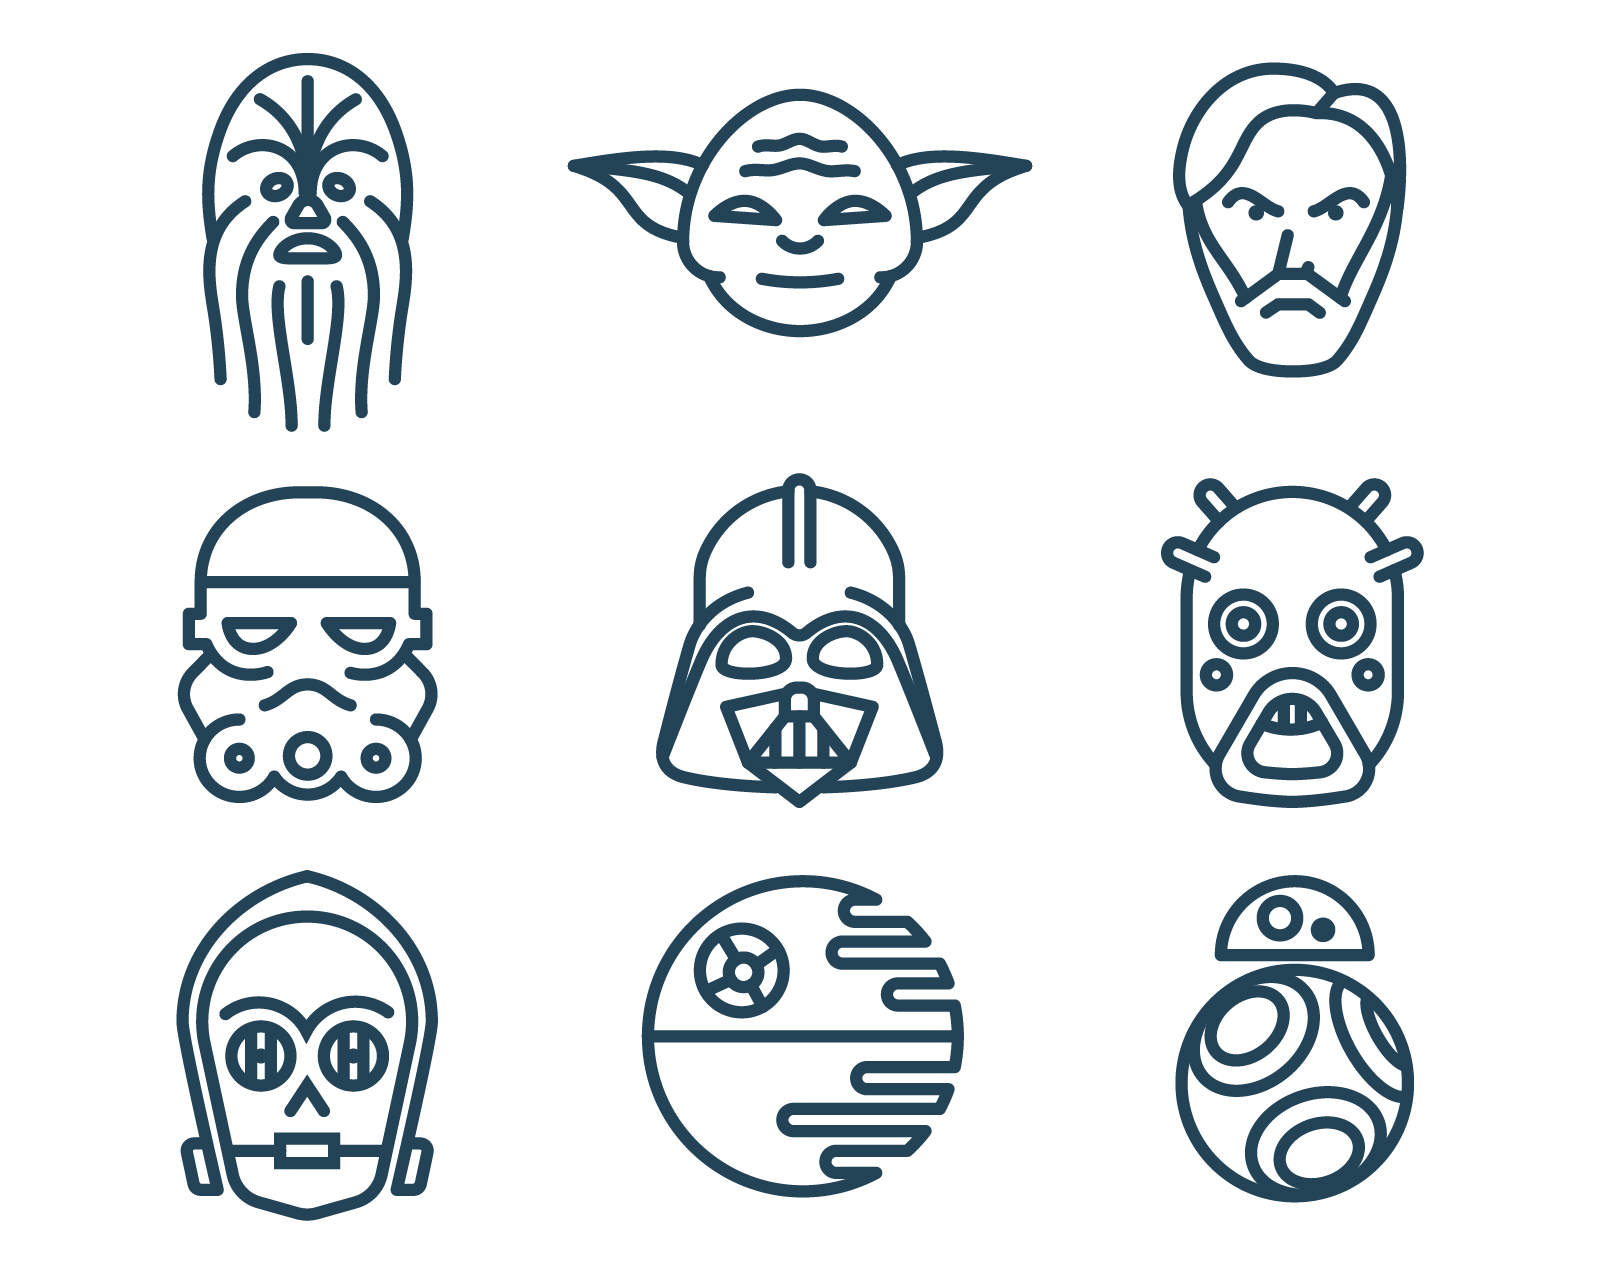 How To Create Star Wars Icons In A Line Art Style Astute Graphics